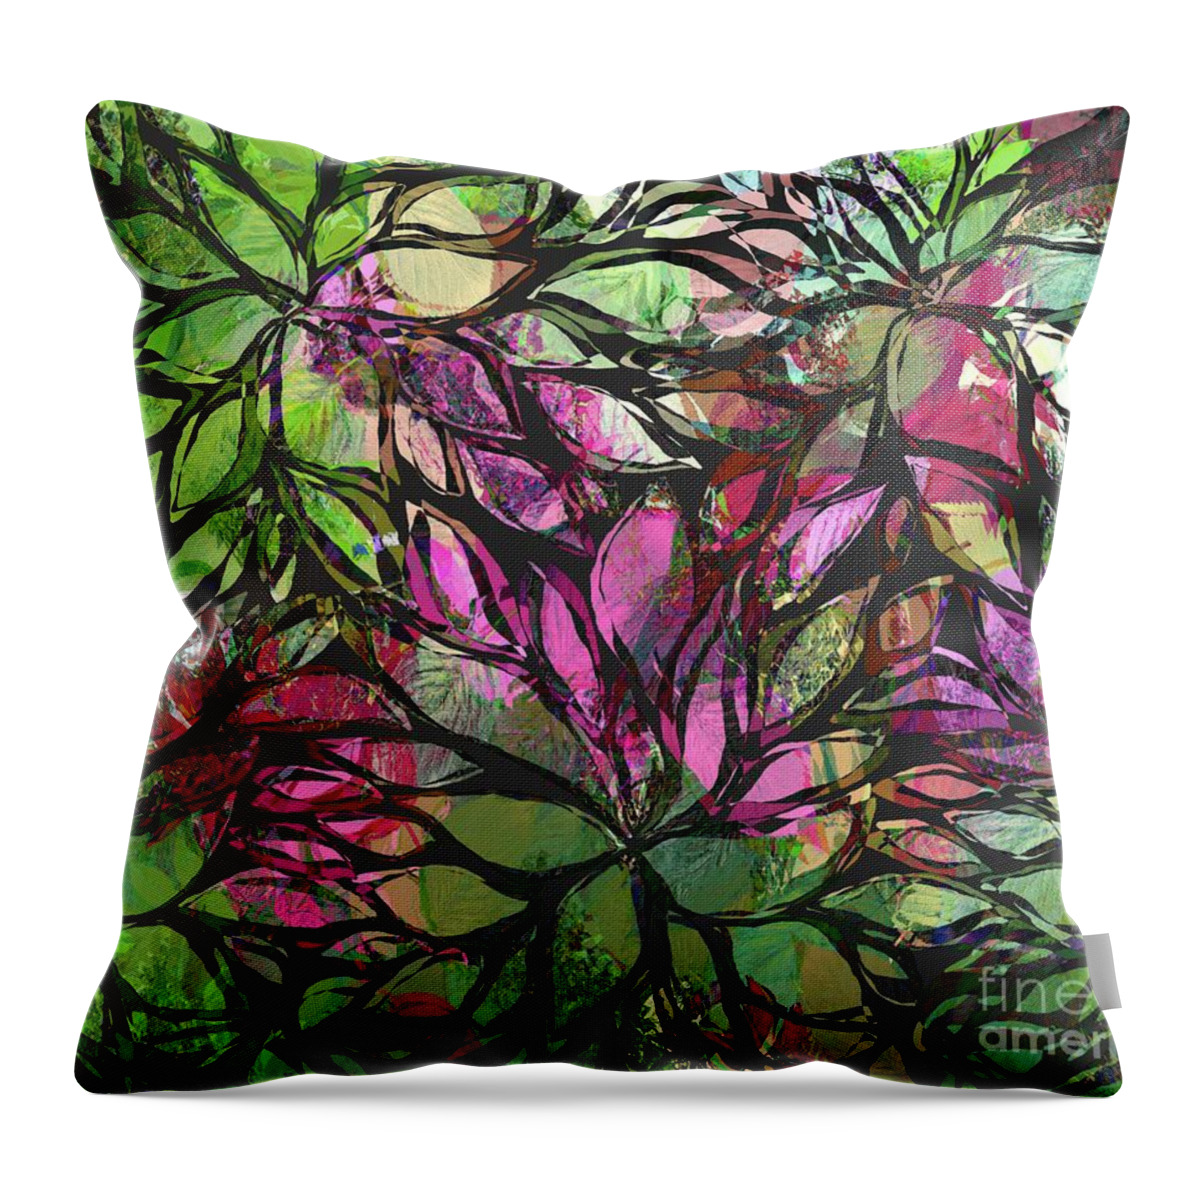 Floral Throw Pillow featuring the digital art Petales - 44ah11 by Variance Collections